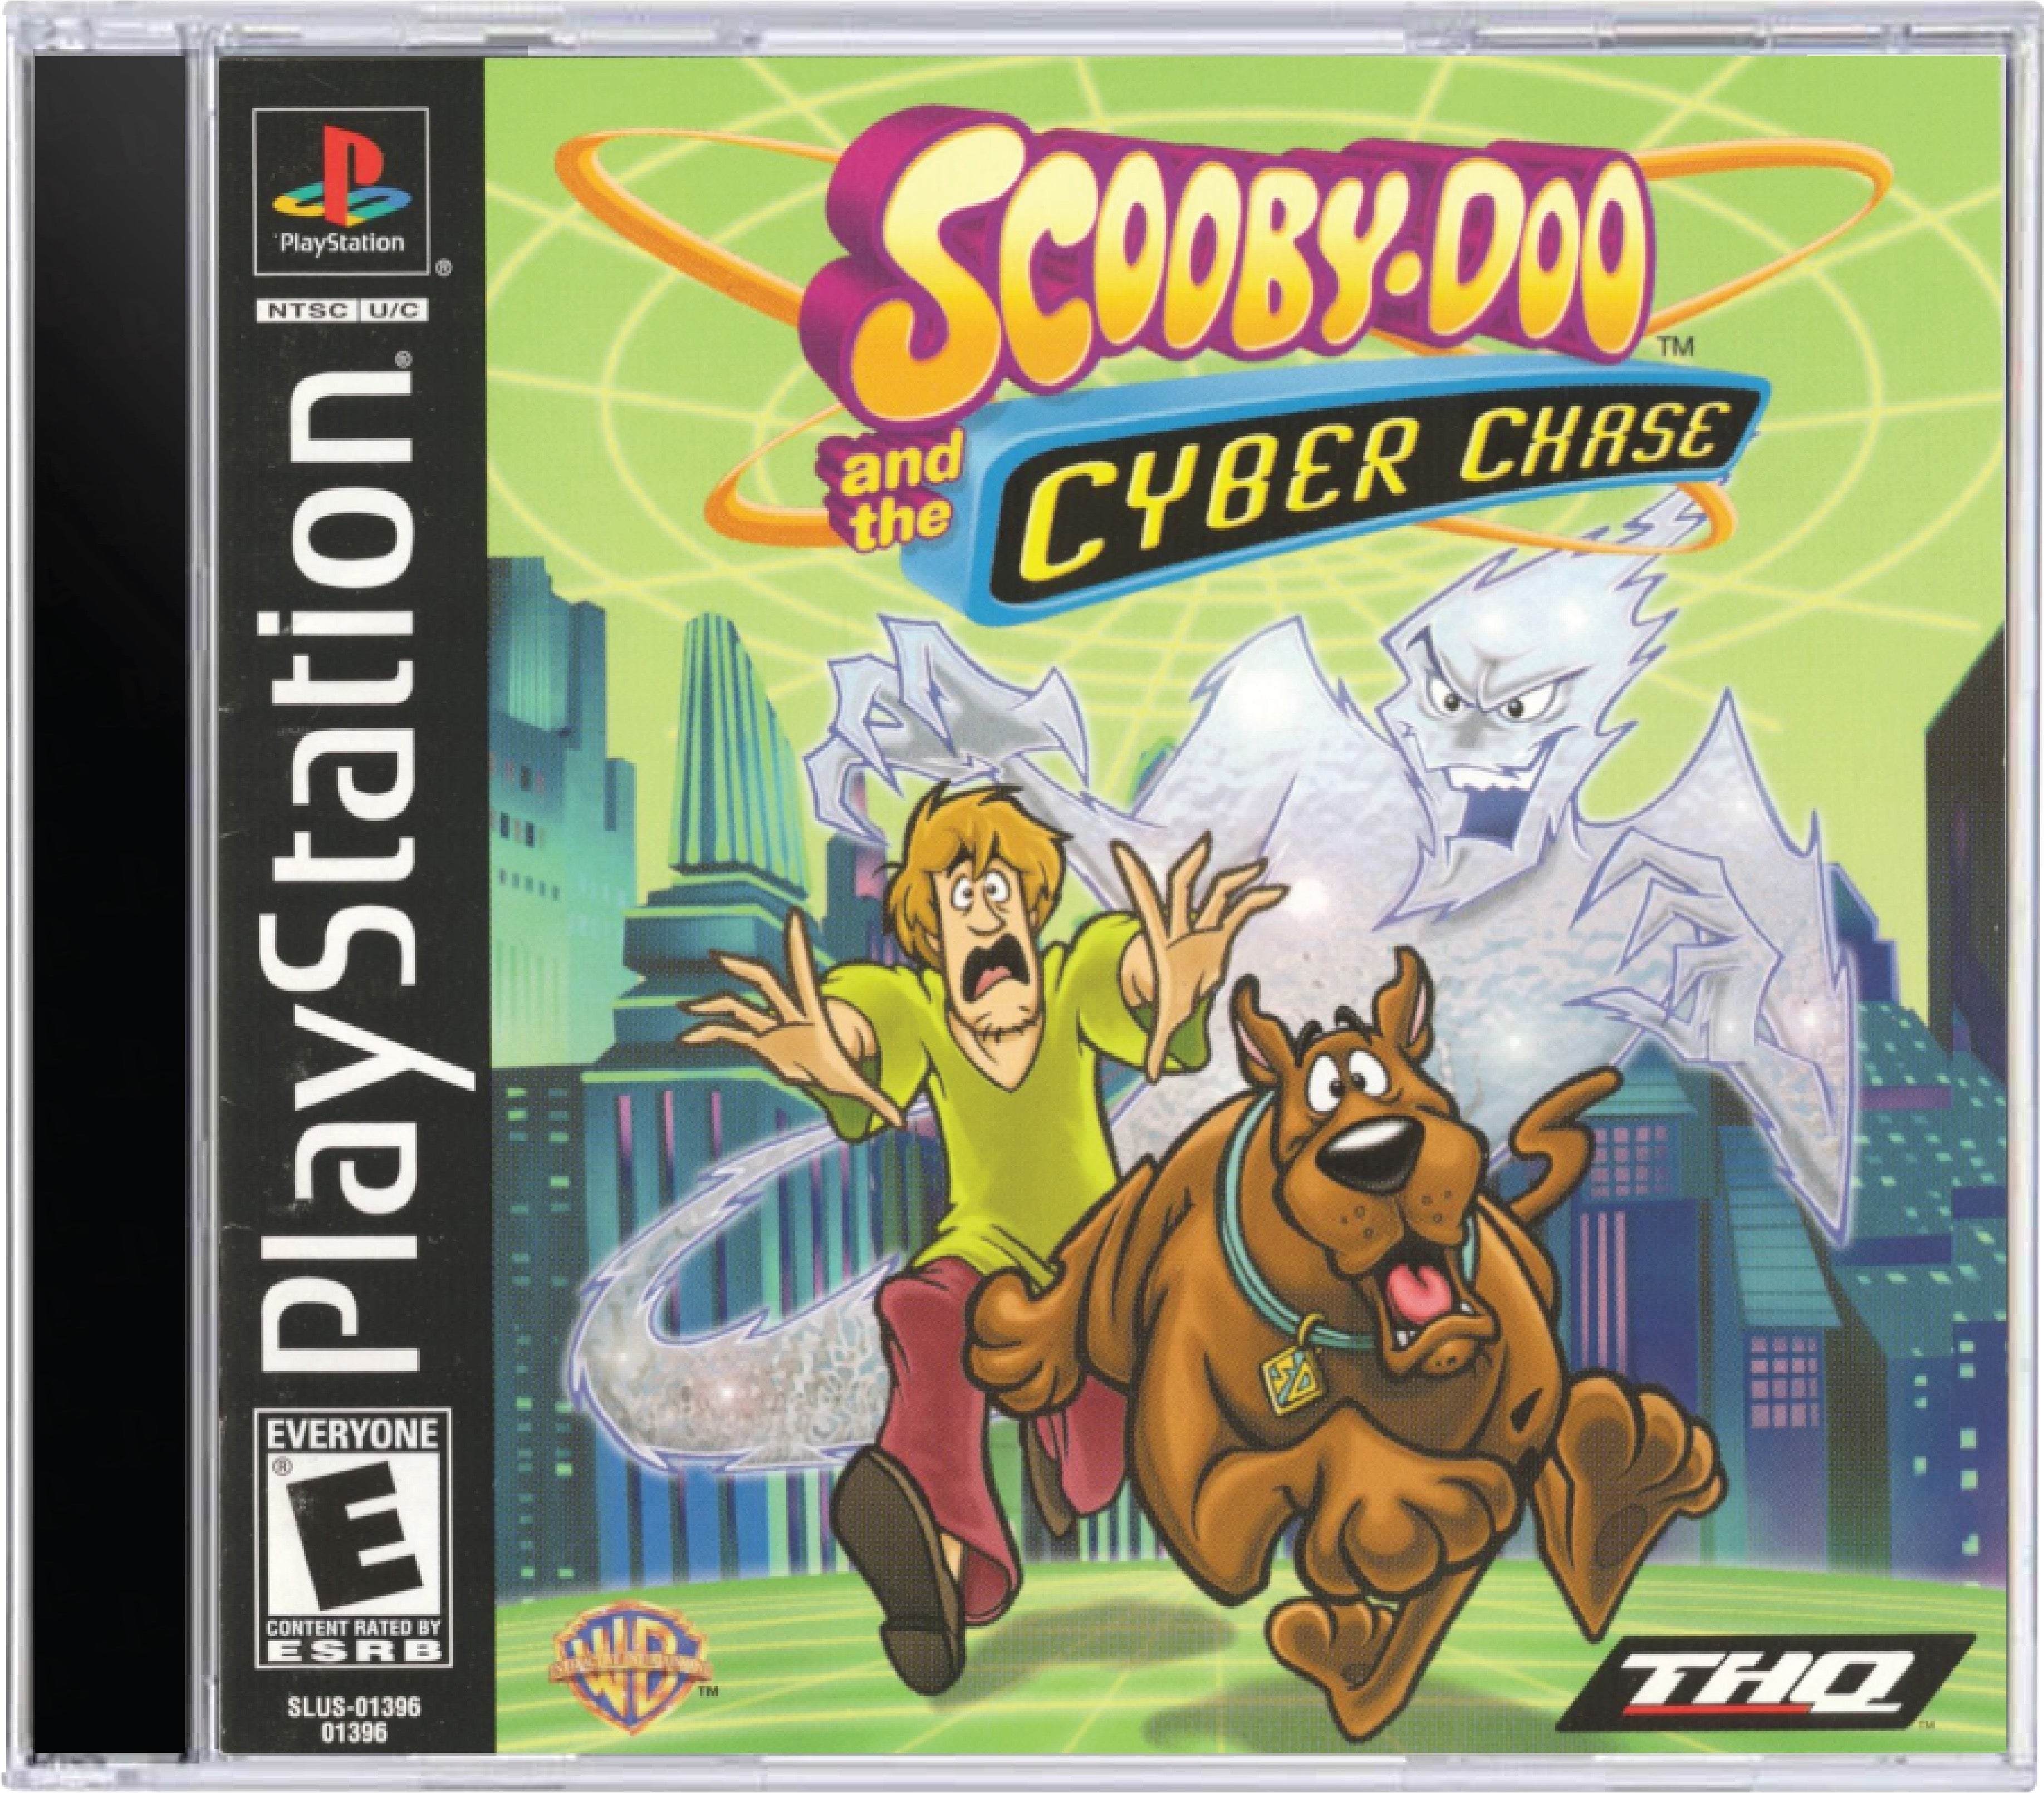 Scooby Doo Cyber Chase Cover Art and Product Photo